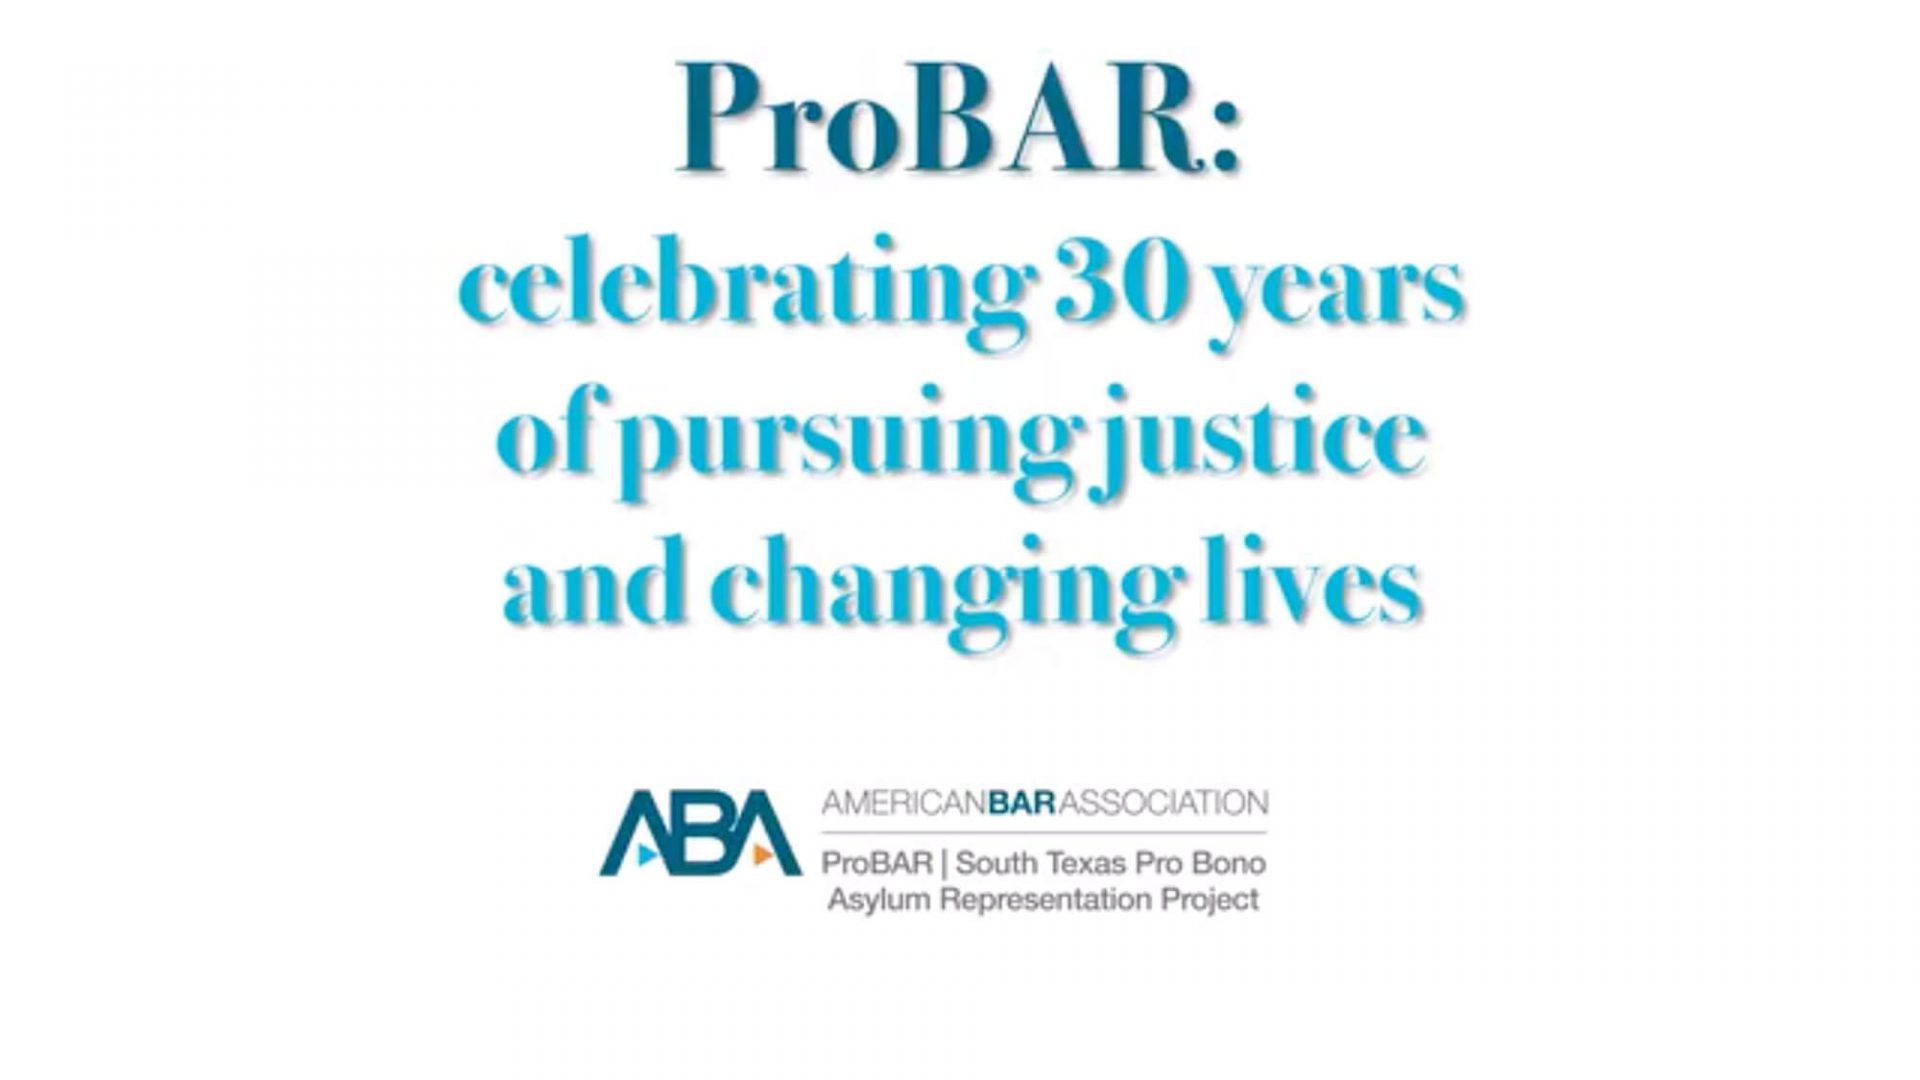 Thumbnail of ProBAR video title "ProBAR celebrating 30 years of pursuing justice and changing lives."